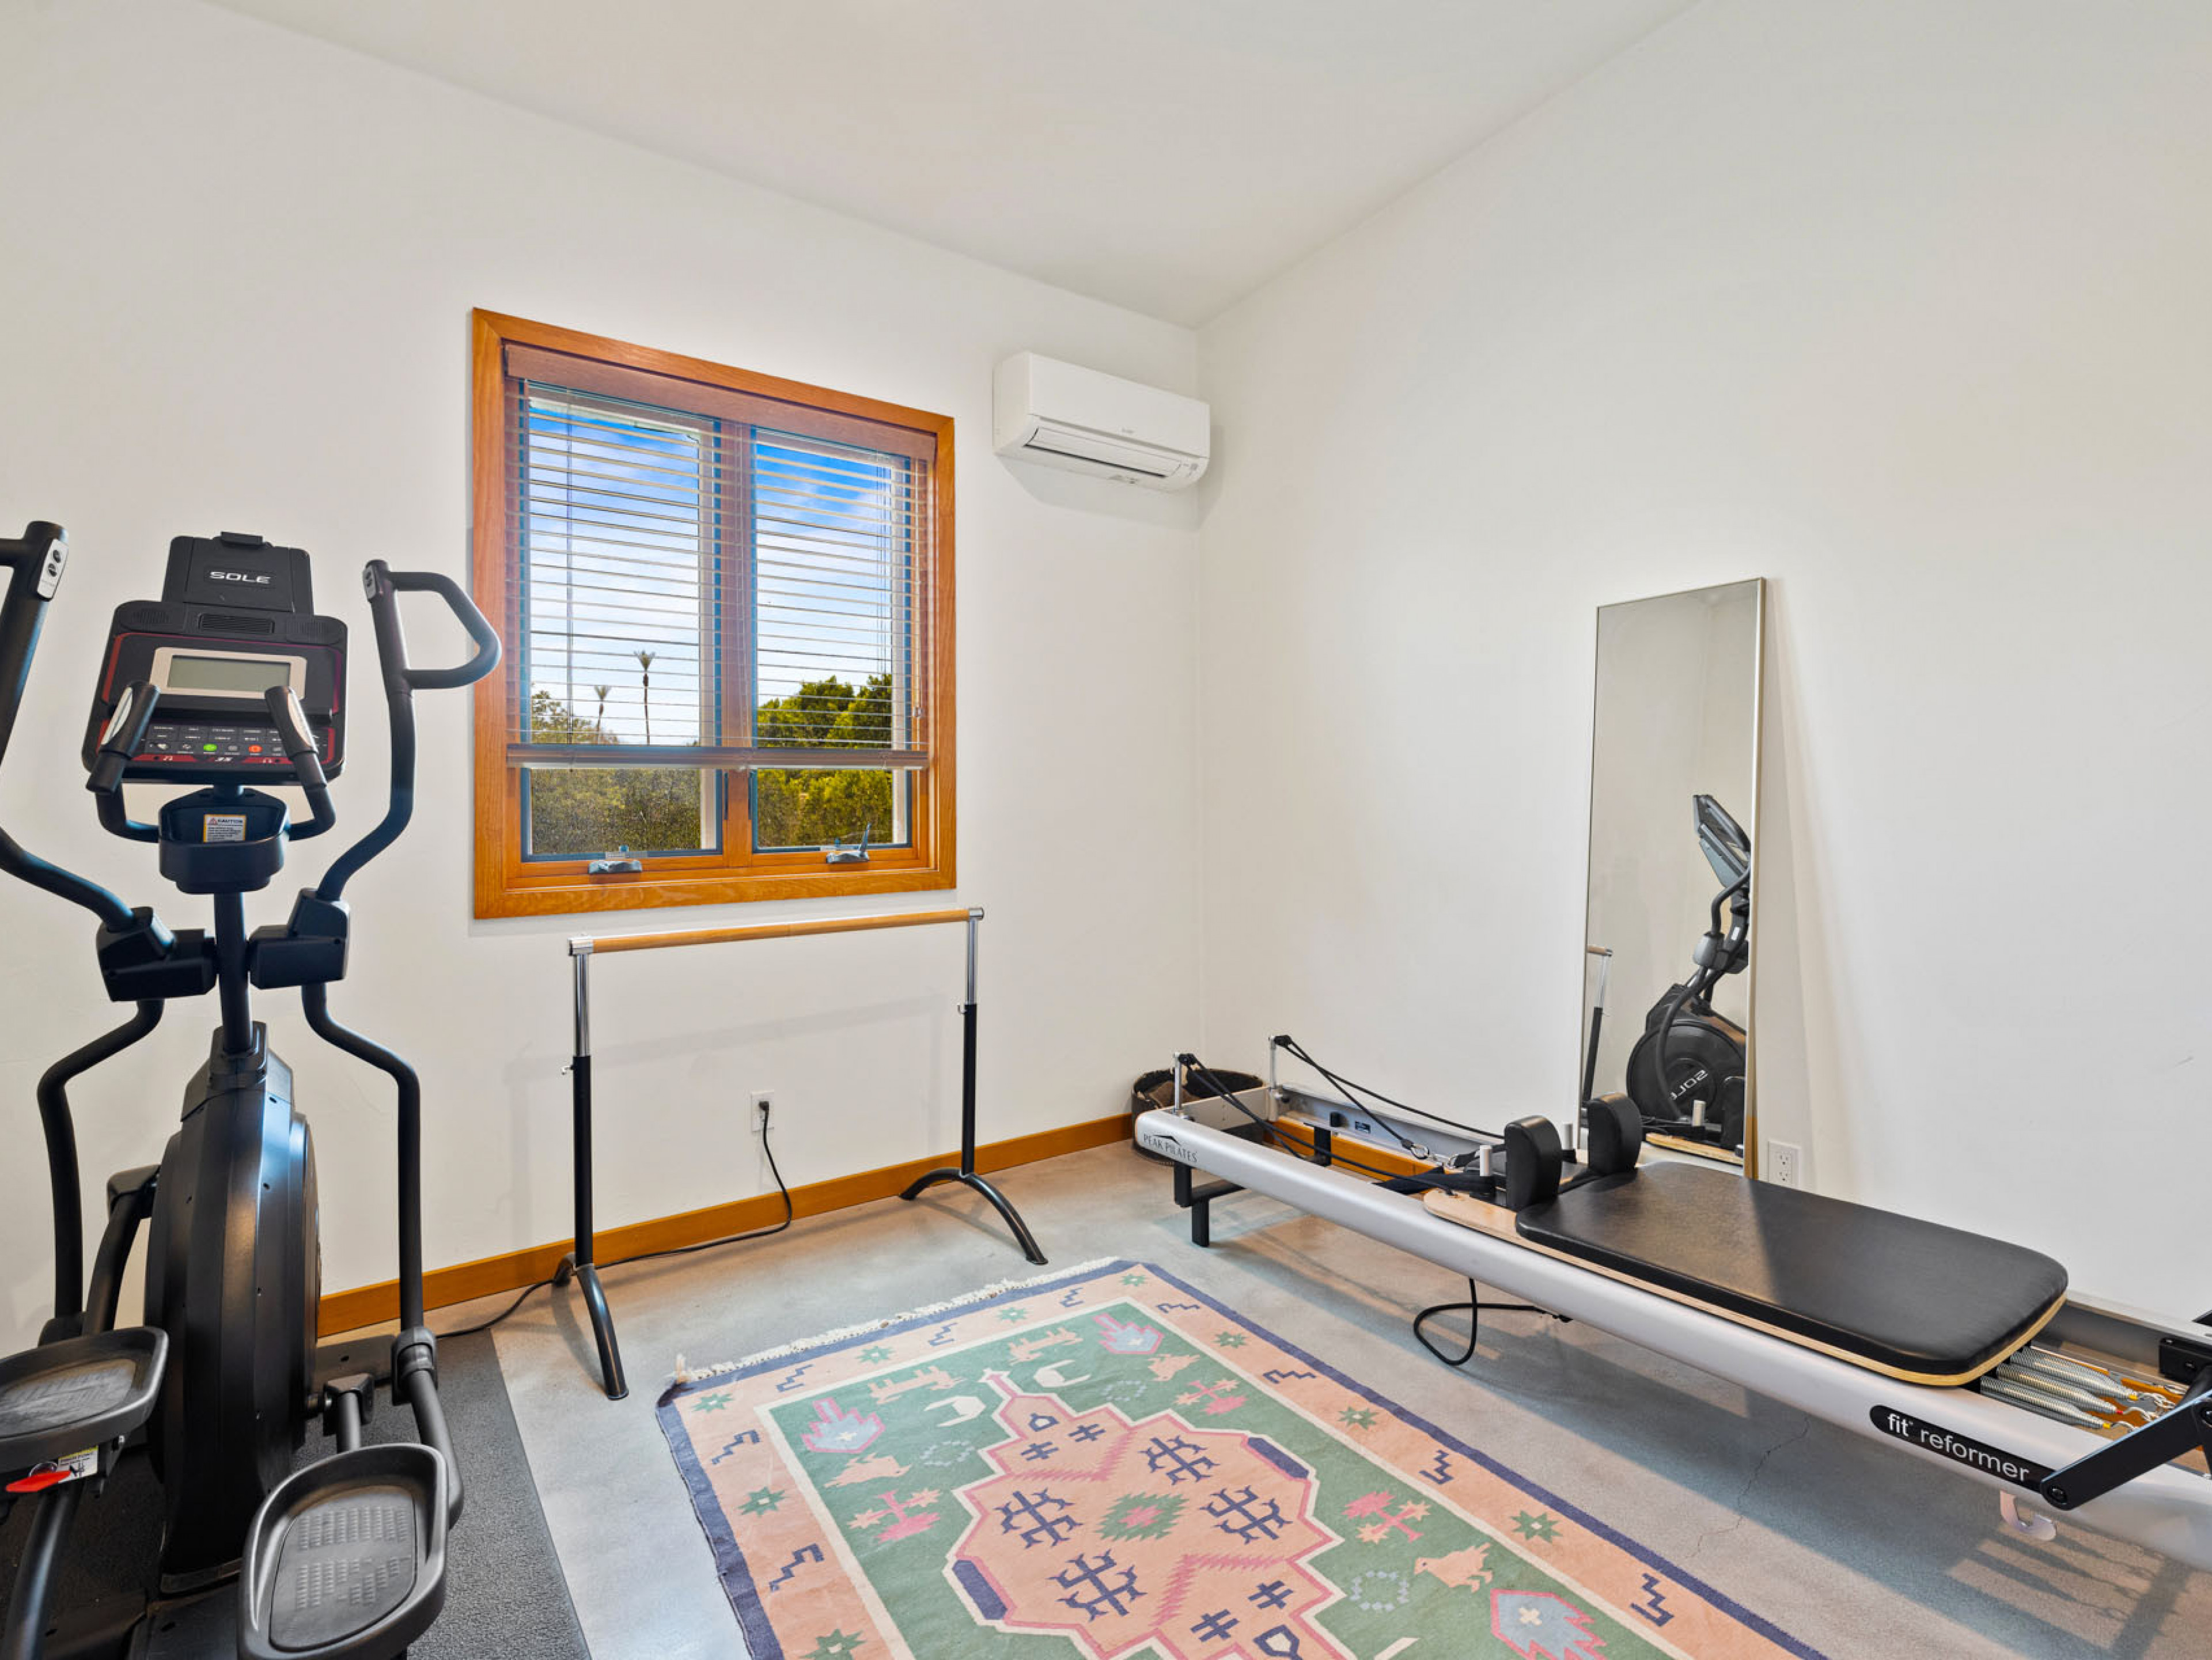 Rancho Mirage 8 vacation rentals in Rancho Mirage with home gyms